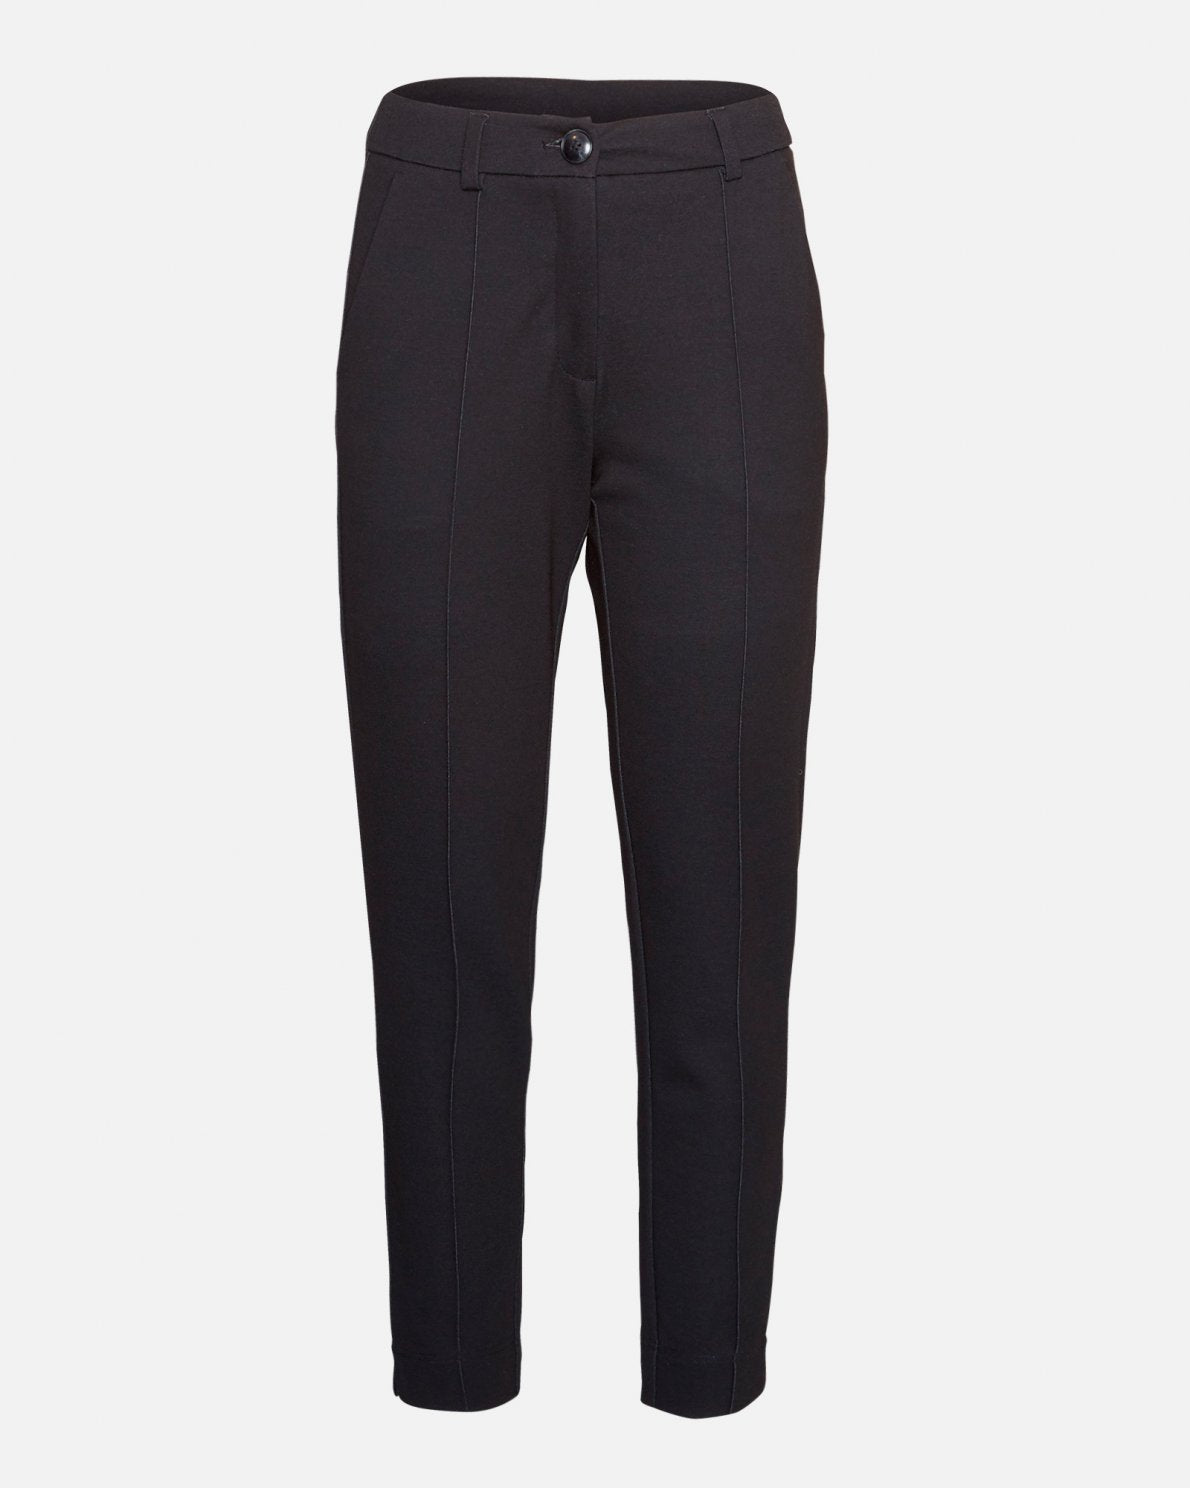 MSCHBericia ankle pants